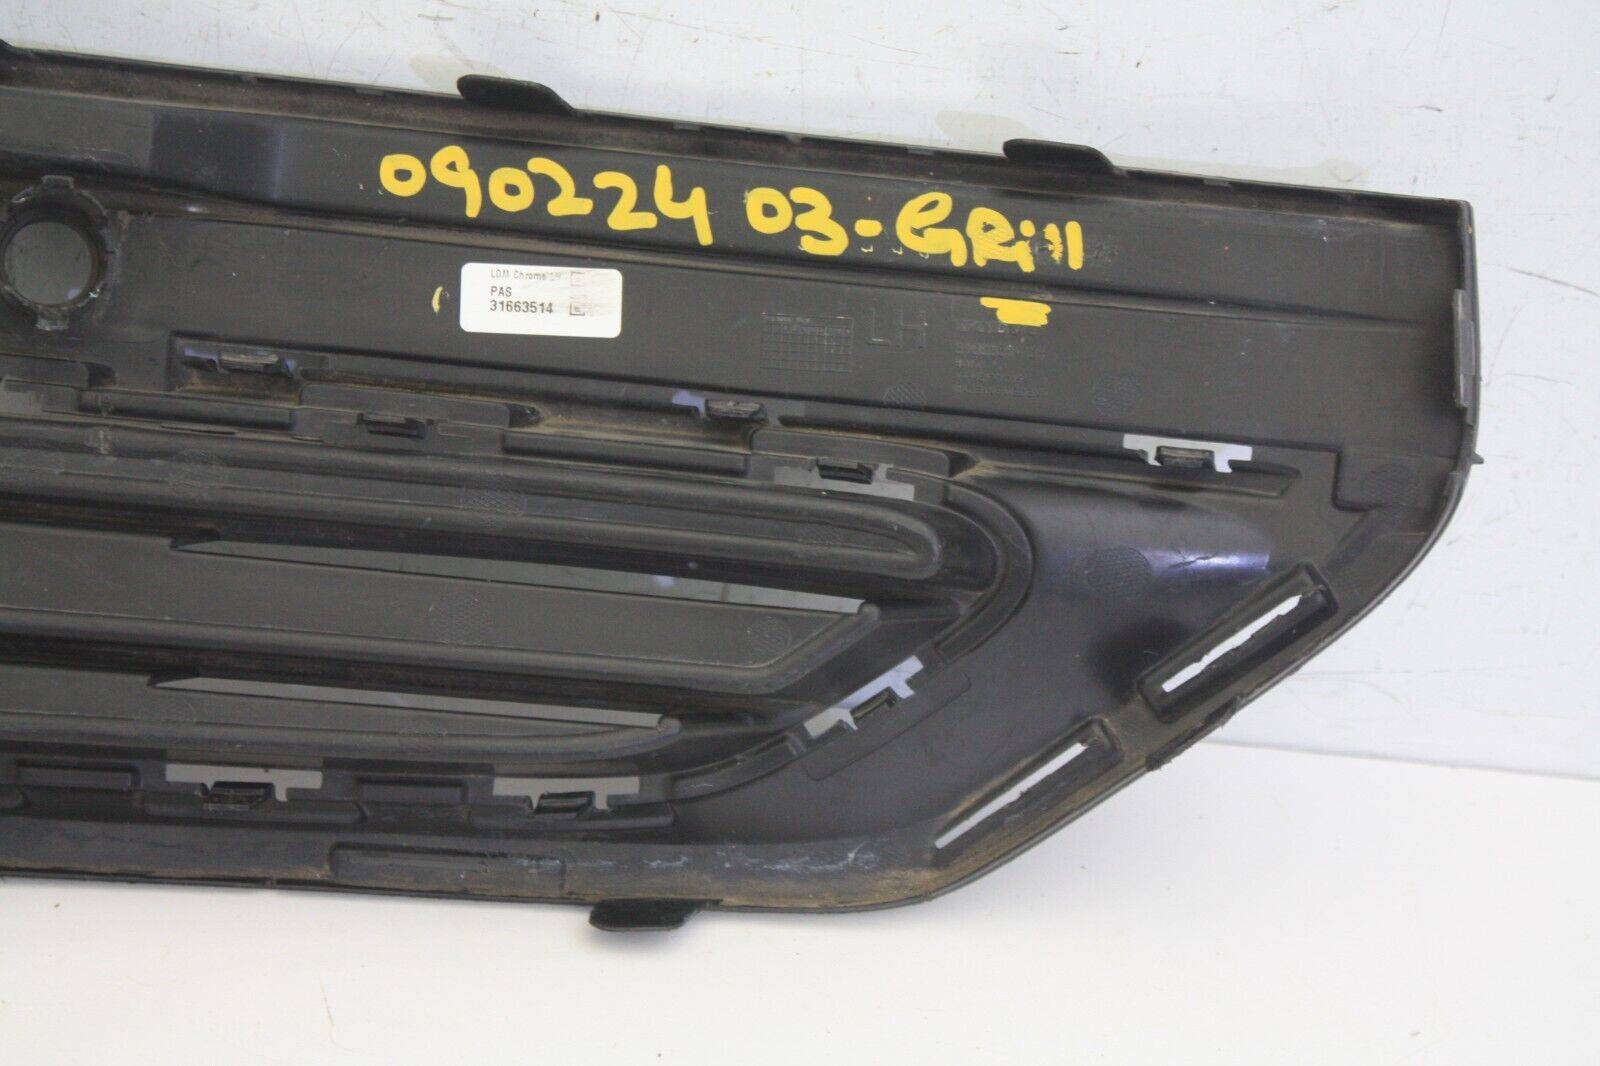 Volvo-XC90-Front-Bumper-Left-Side-Lower-Grill-31663514-Genuine-176232057764-12